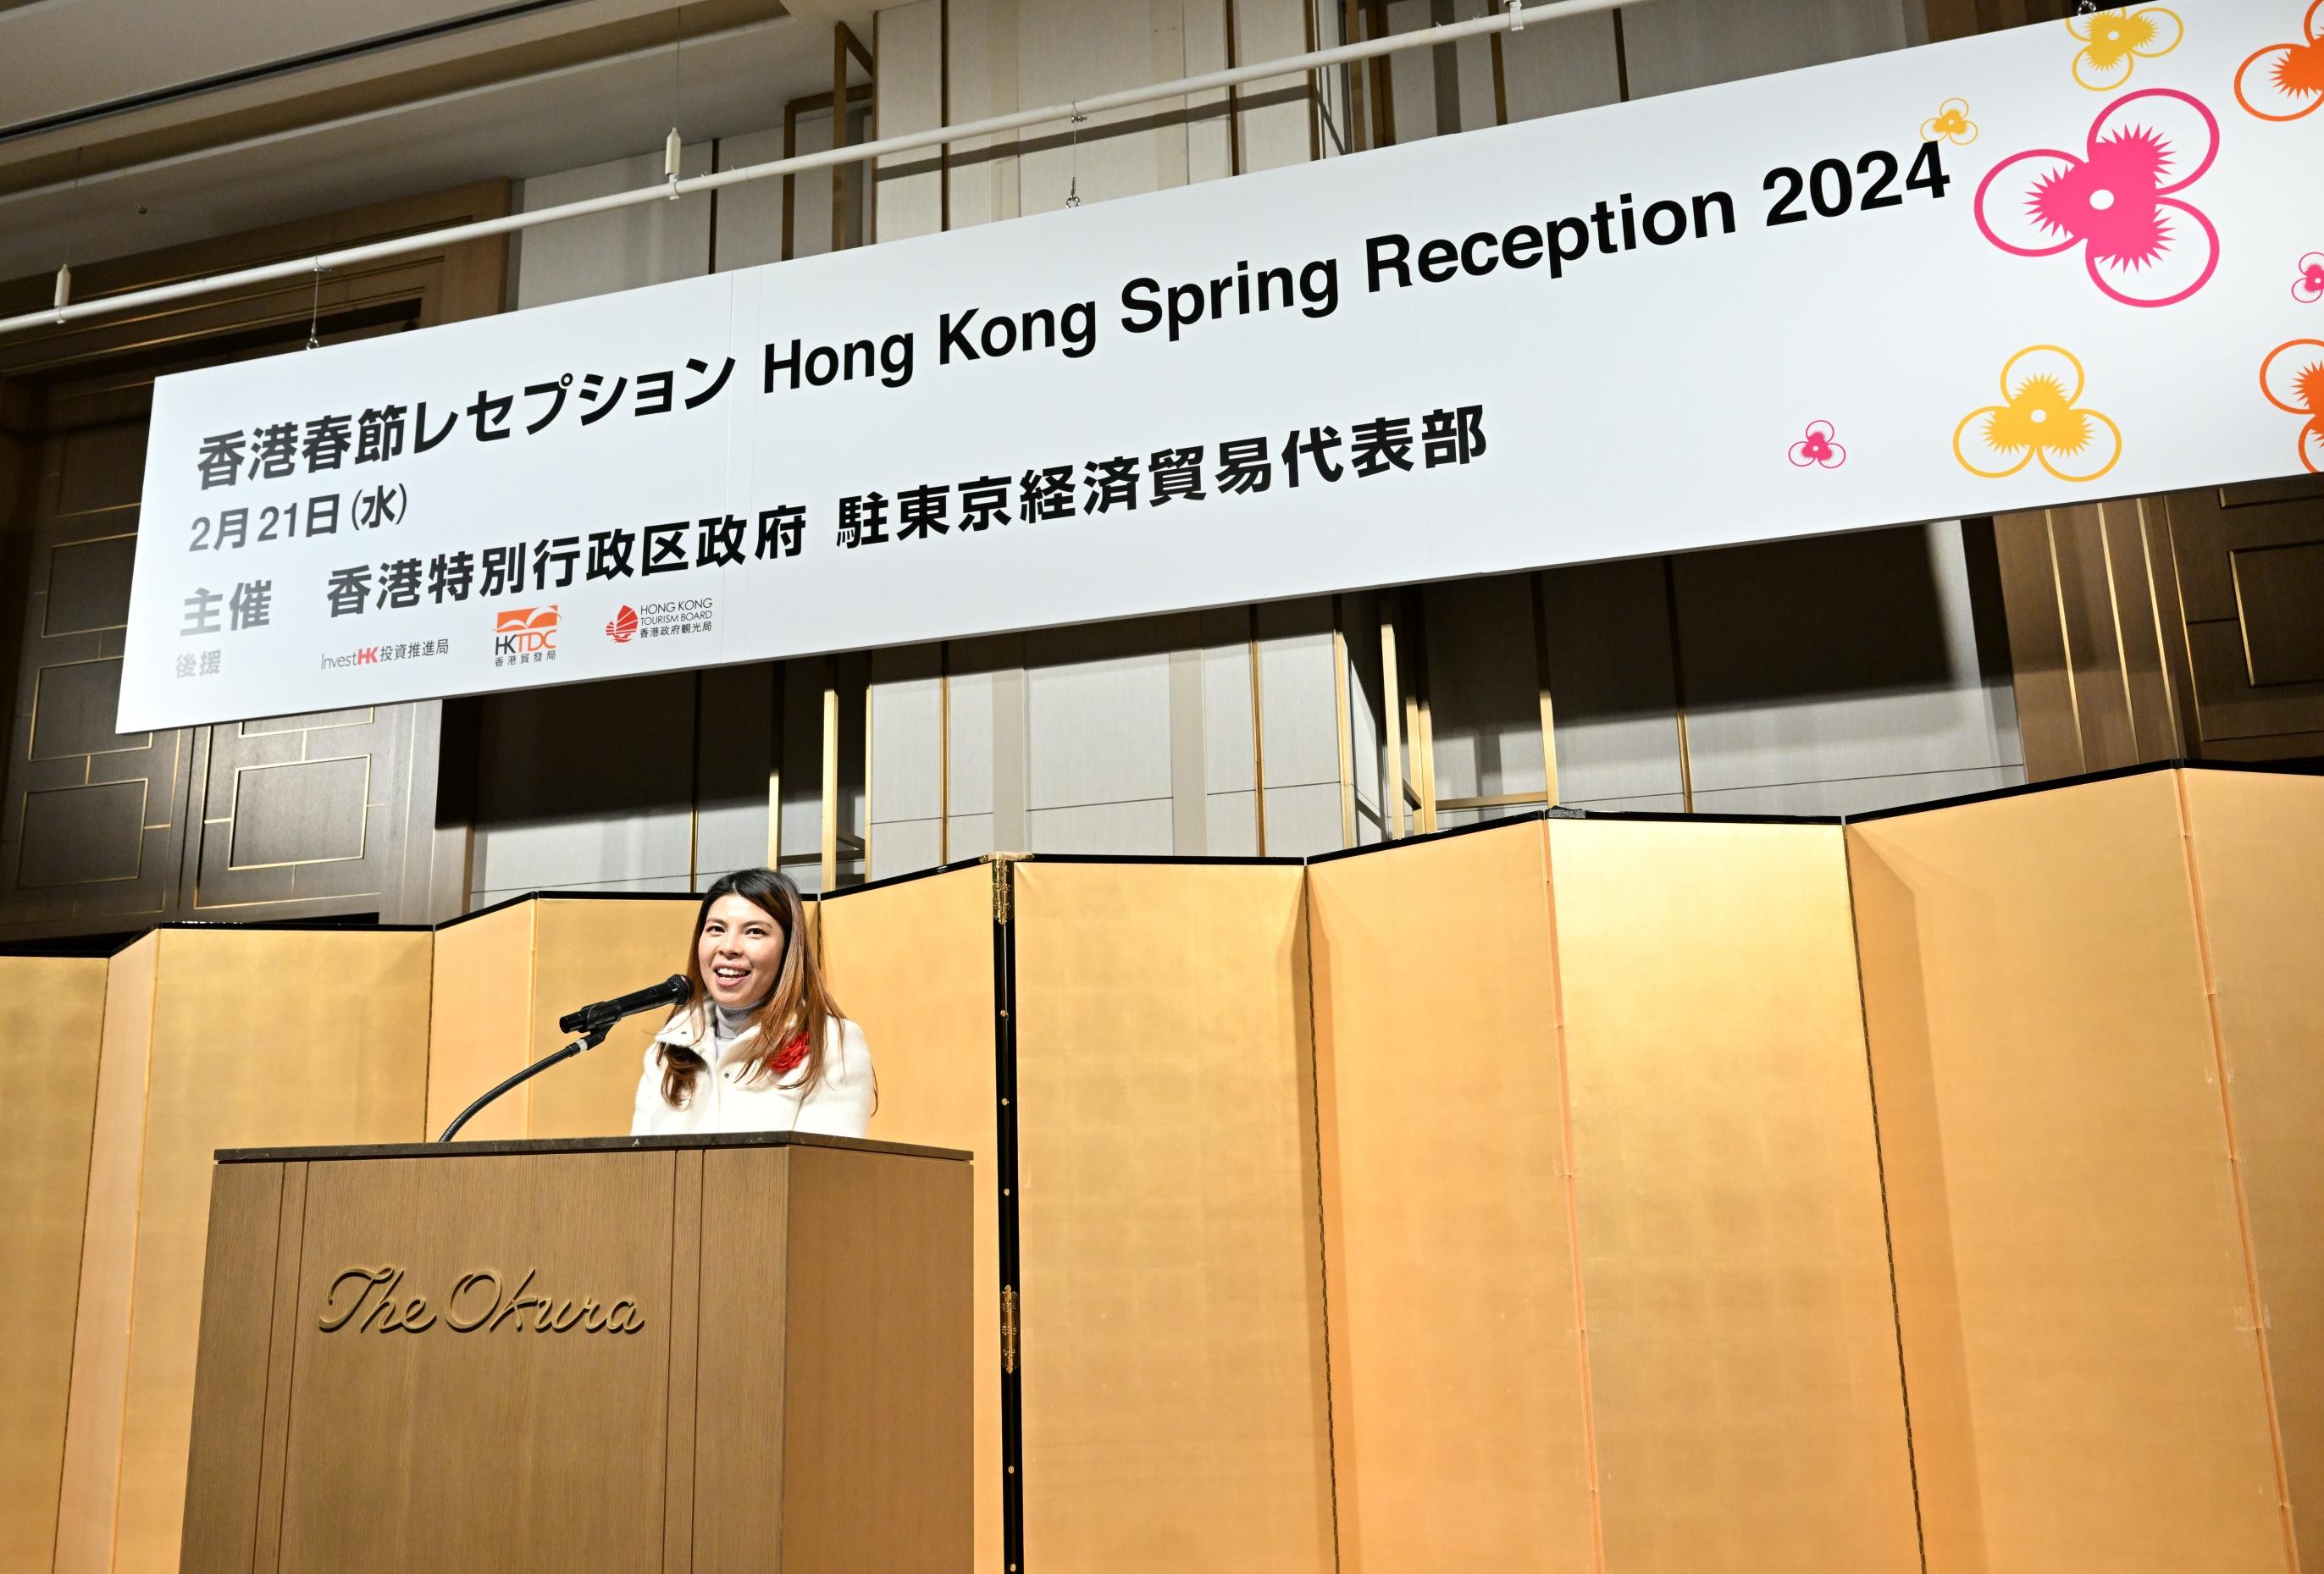 The Principal Hong Kong Economic and Trade Representative (Tokyo), Miss Winsome Au, speaks at the spring reception held by the Hong Kong Economic and Trade Office (Tokyo) in Tokyo today (February 21).